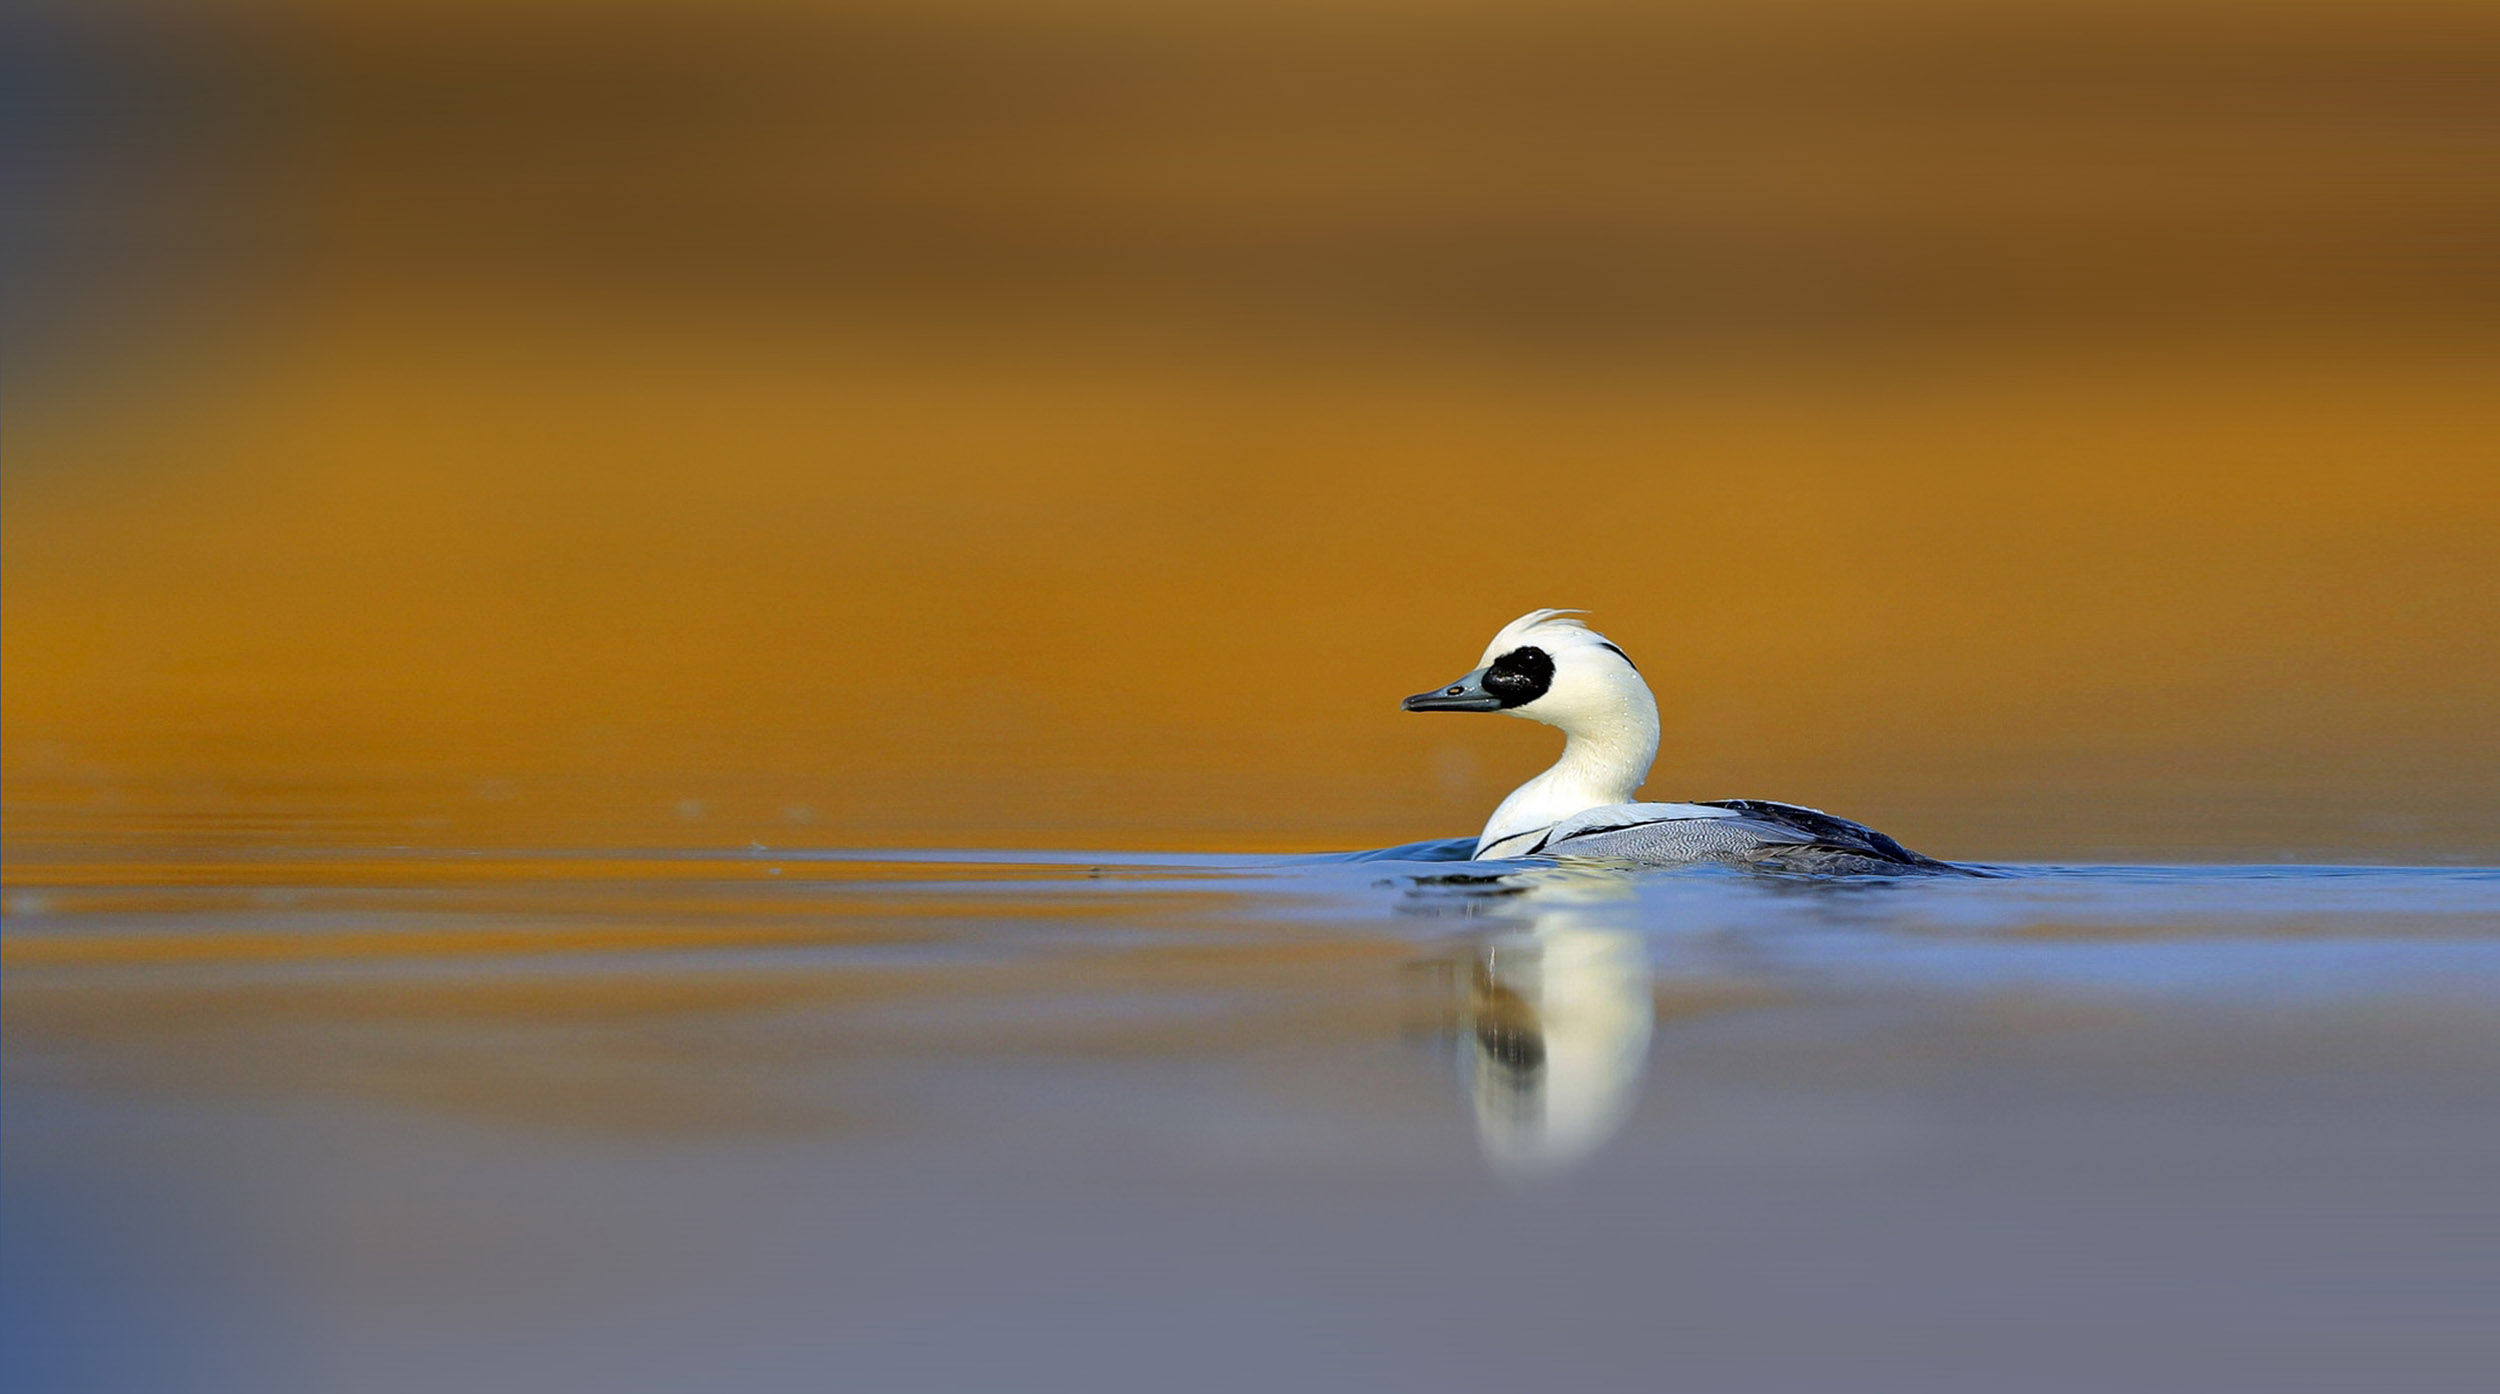 A lone Smew swimming across still water with an orange reflection.